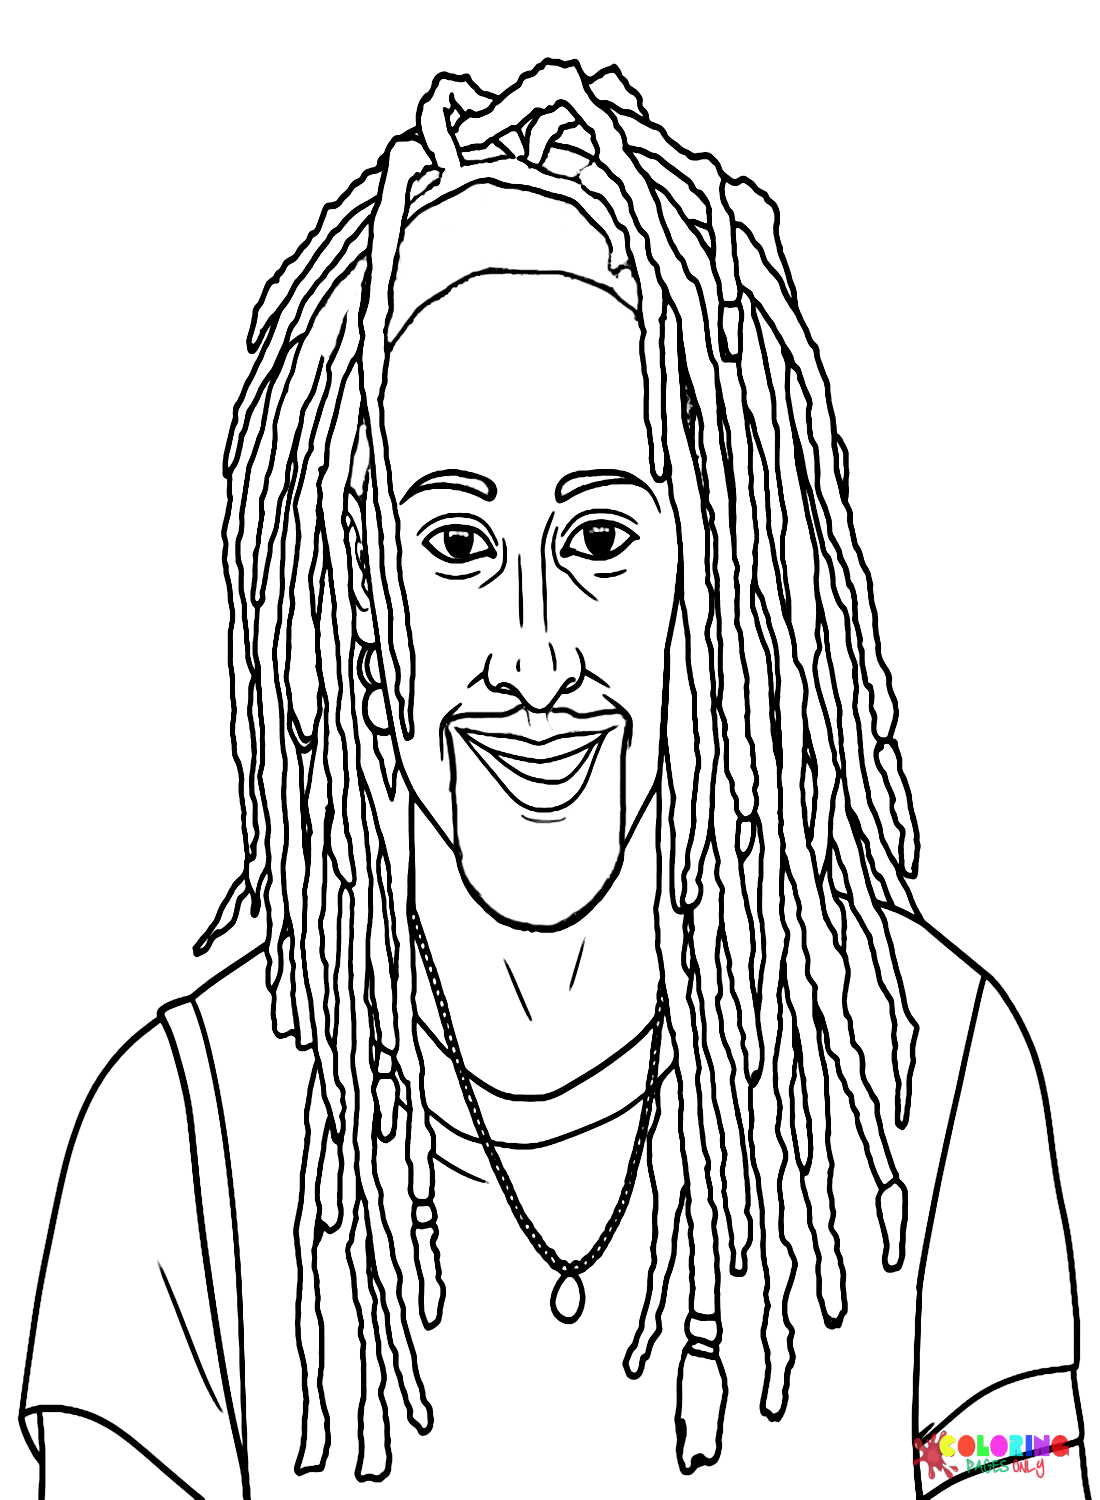 Dreadlocks Styles Coloring Page